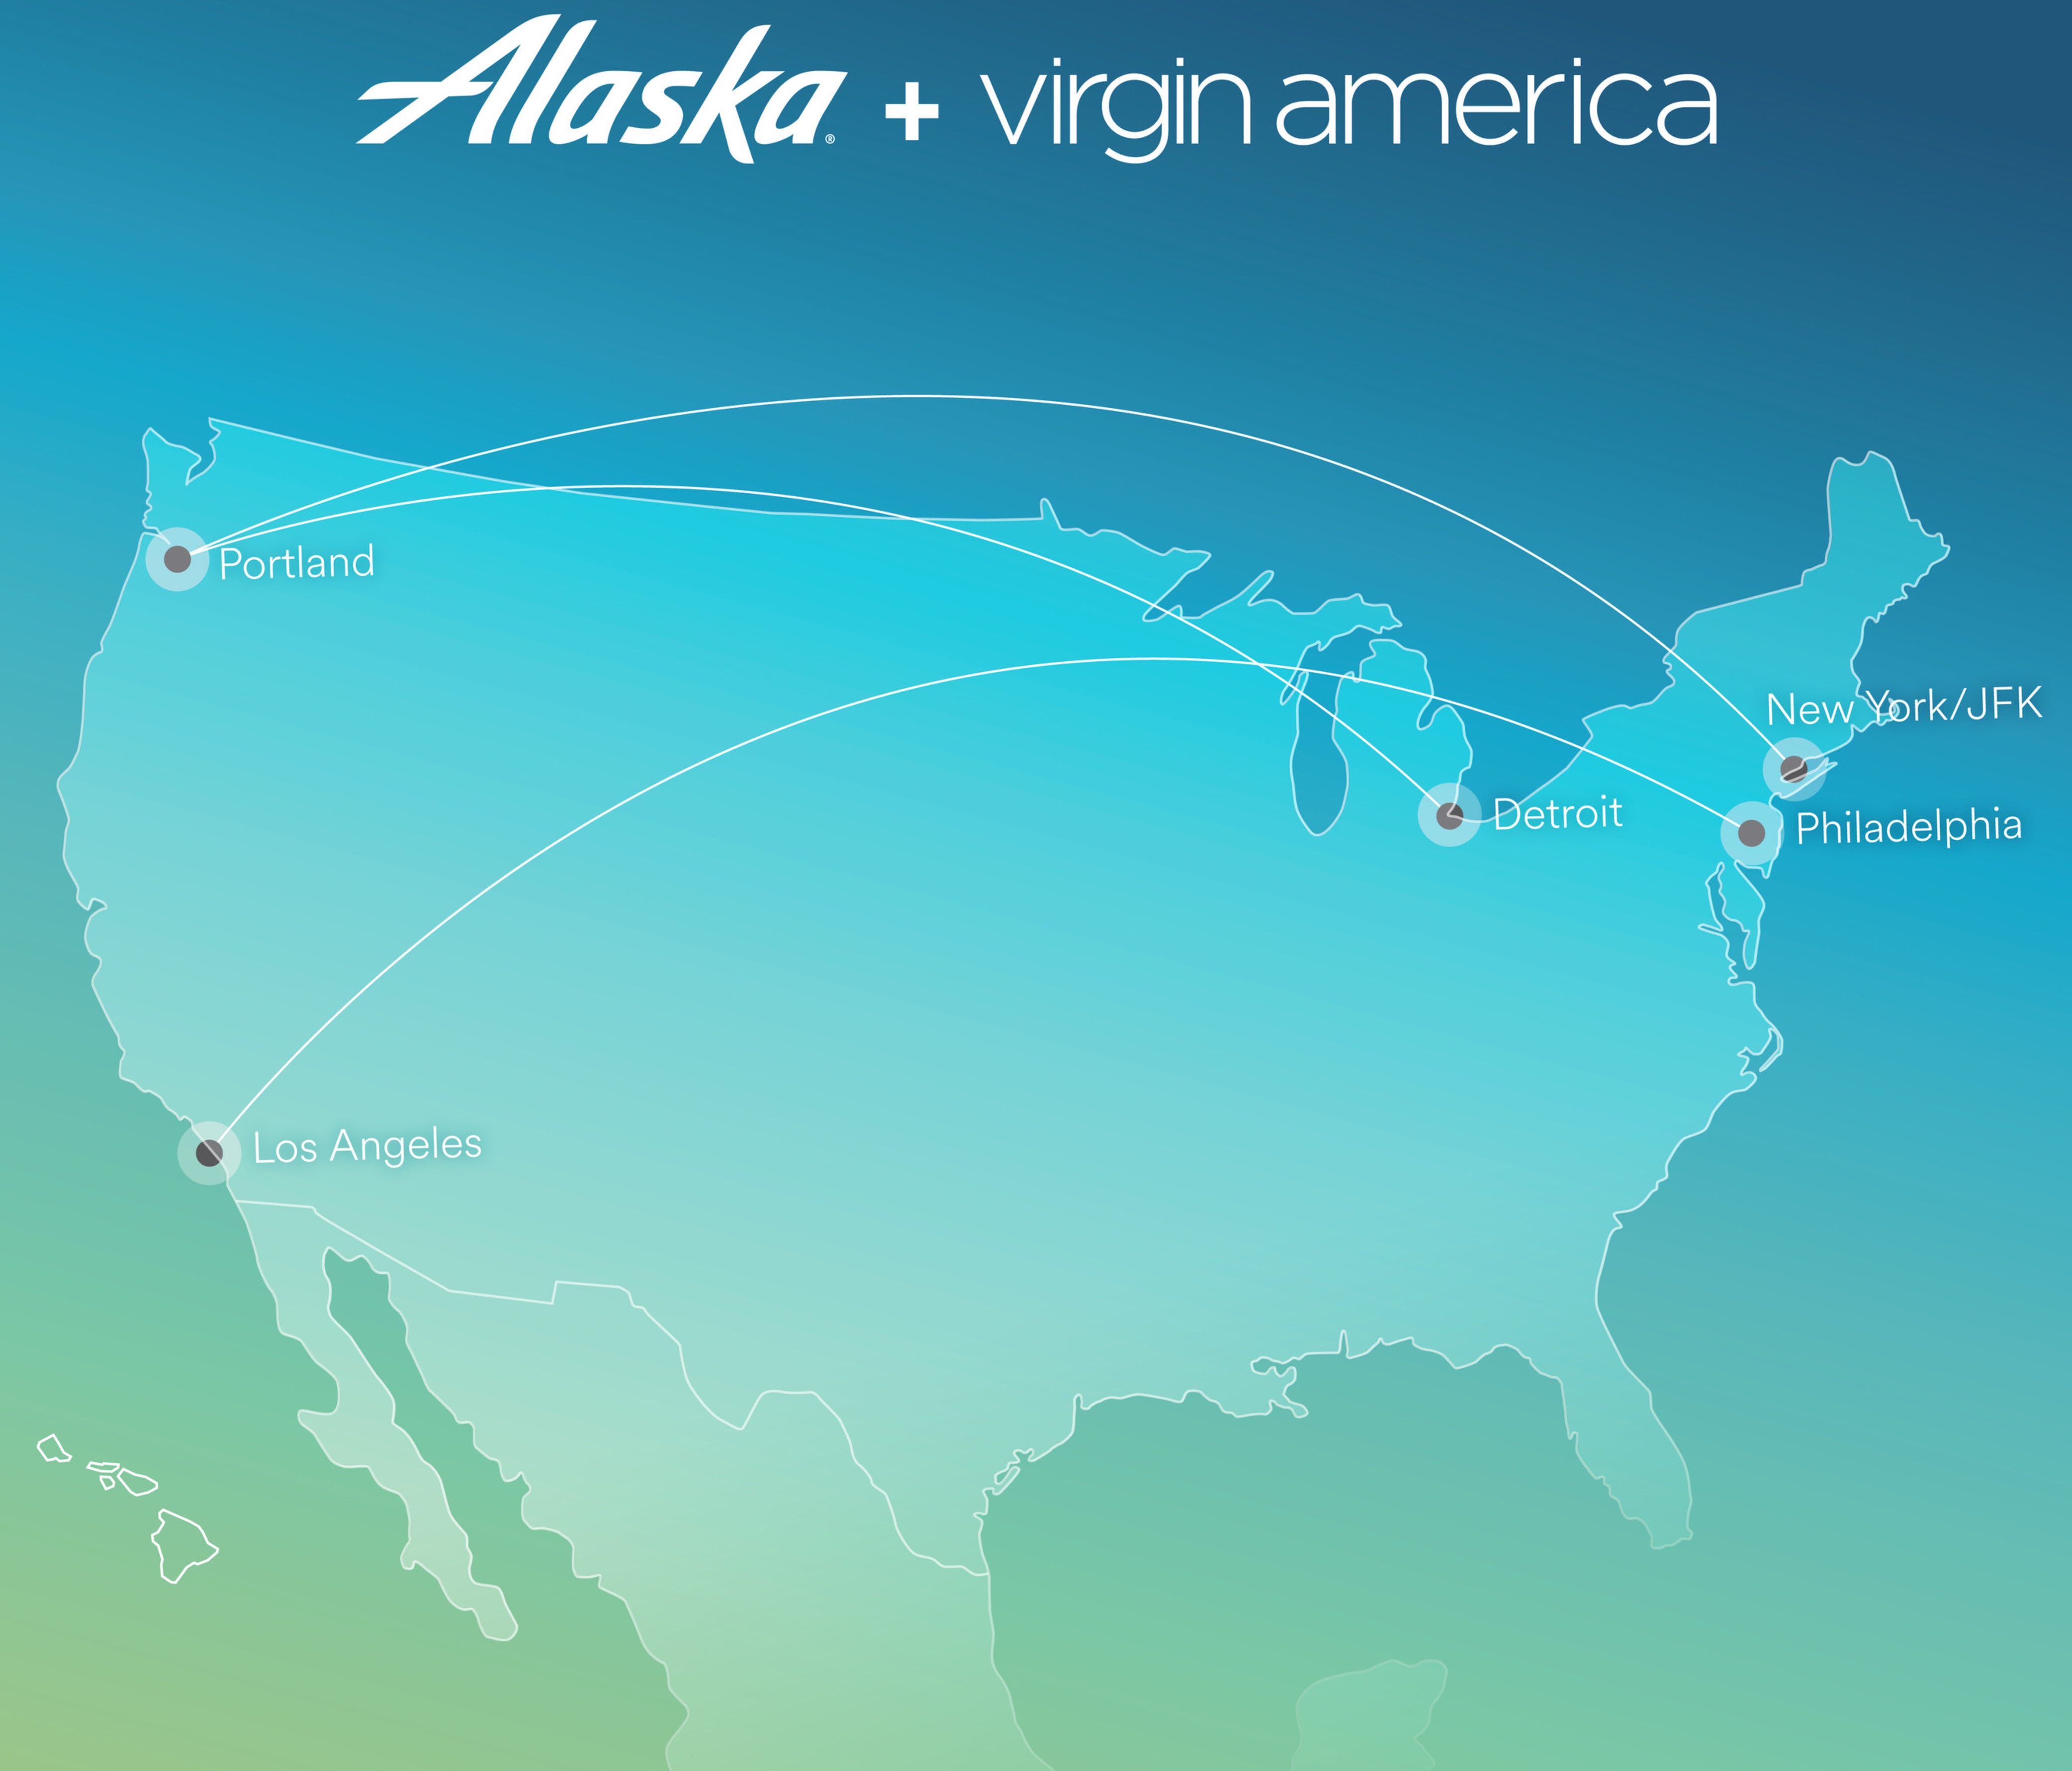 This promotional image from Alaska Airlines shows new cross-country routes it announced on April 5, 2017.